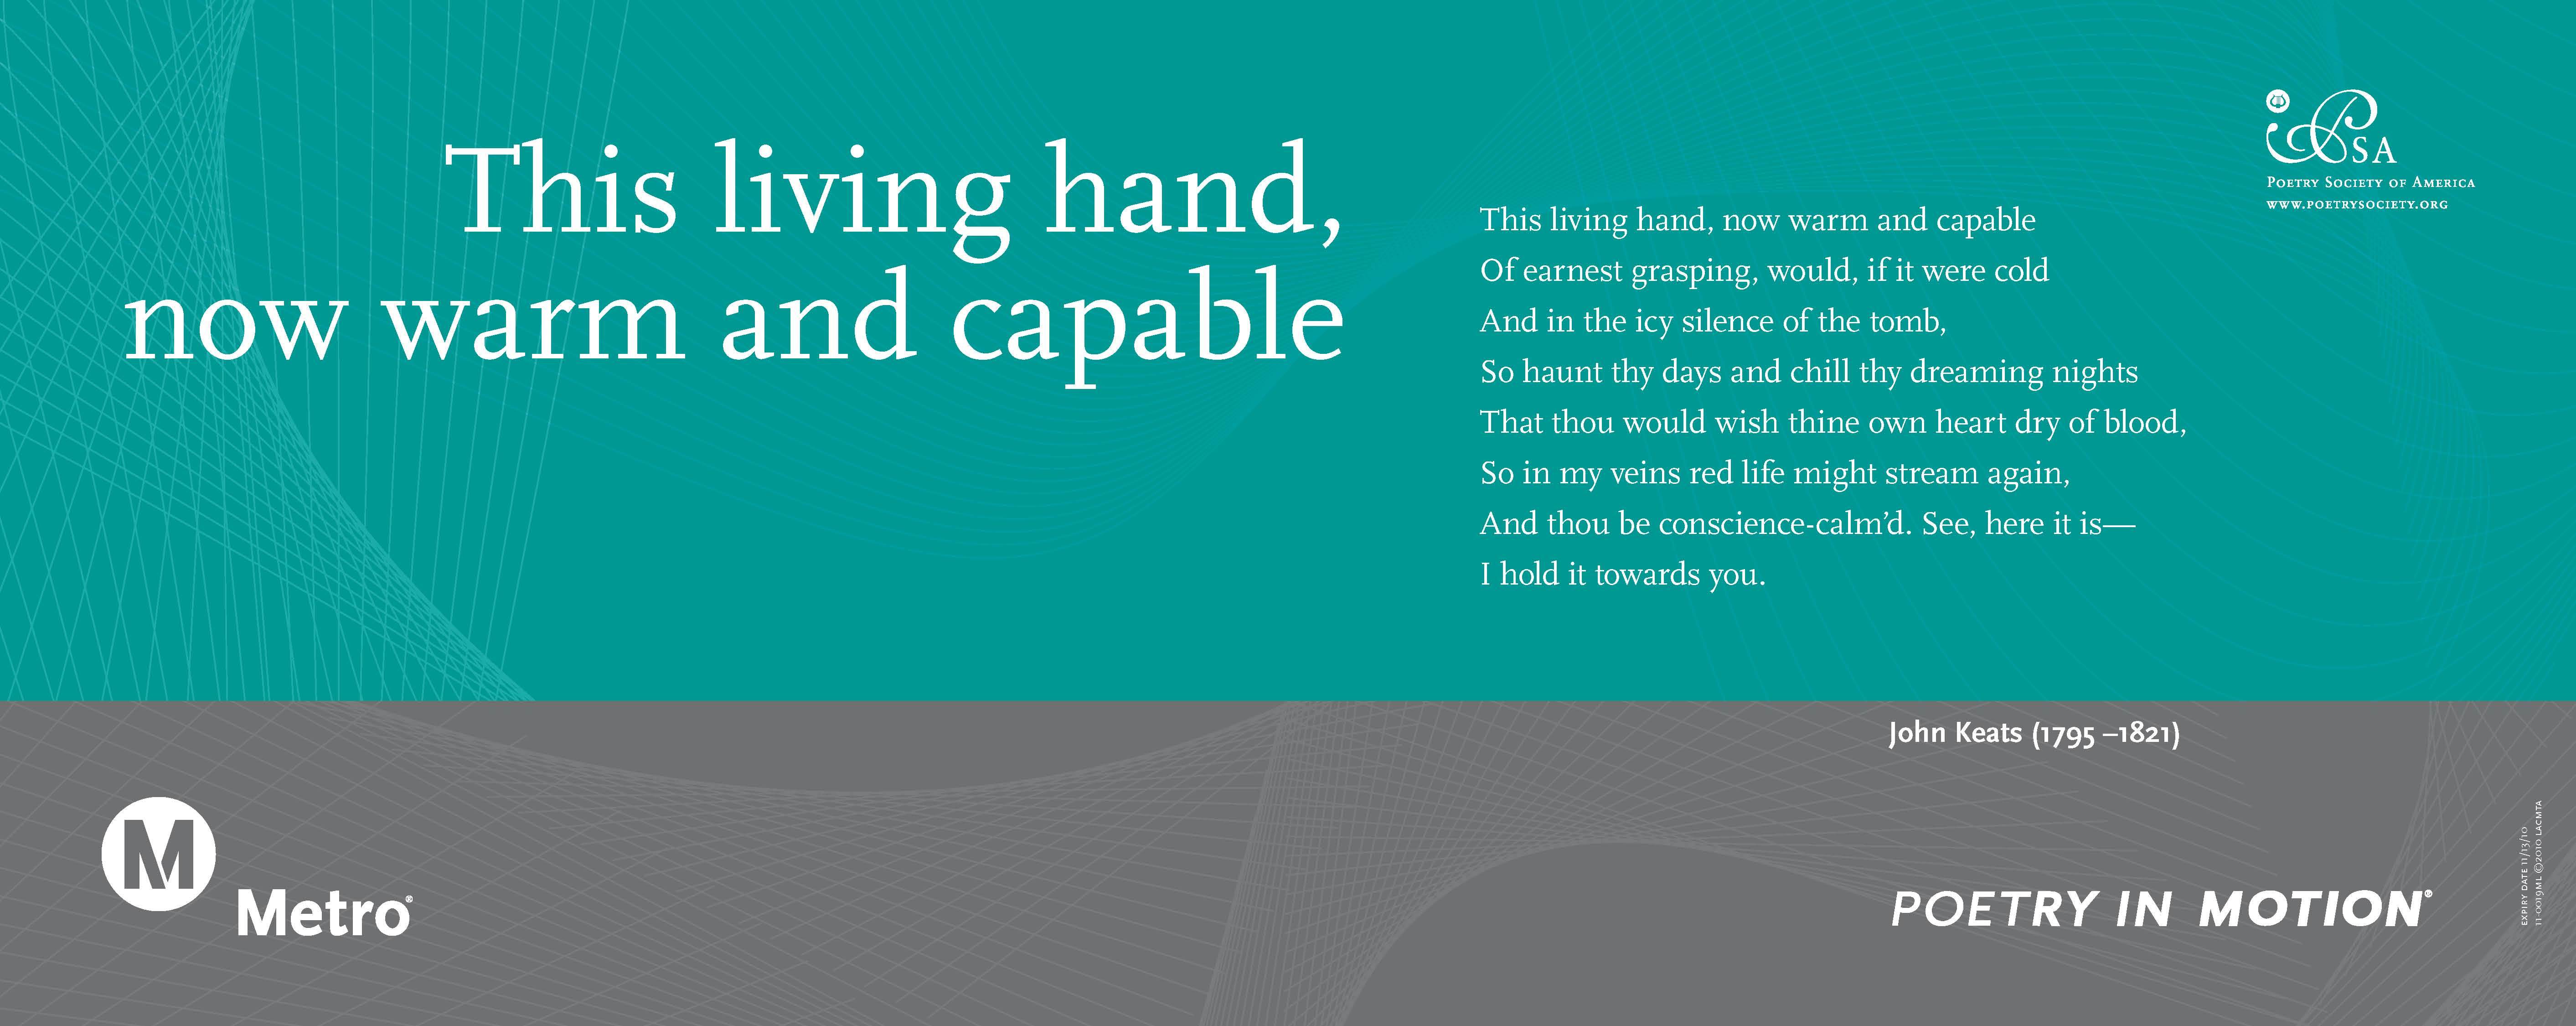 A vertical teal and gray poster features a poem titled This living hand, now warm and capable, by John Keats.